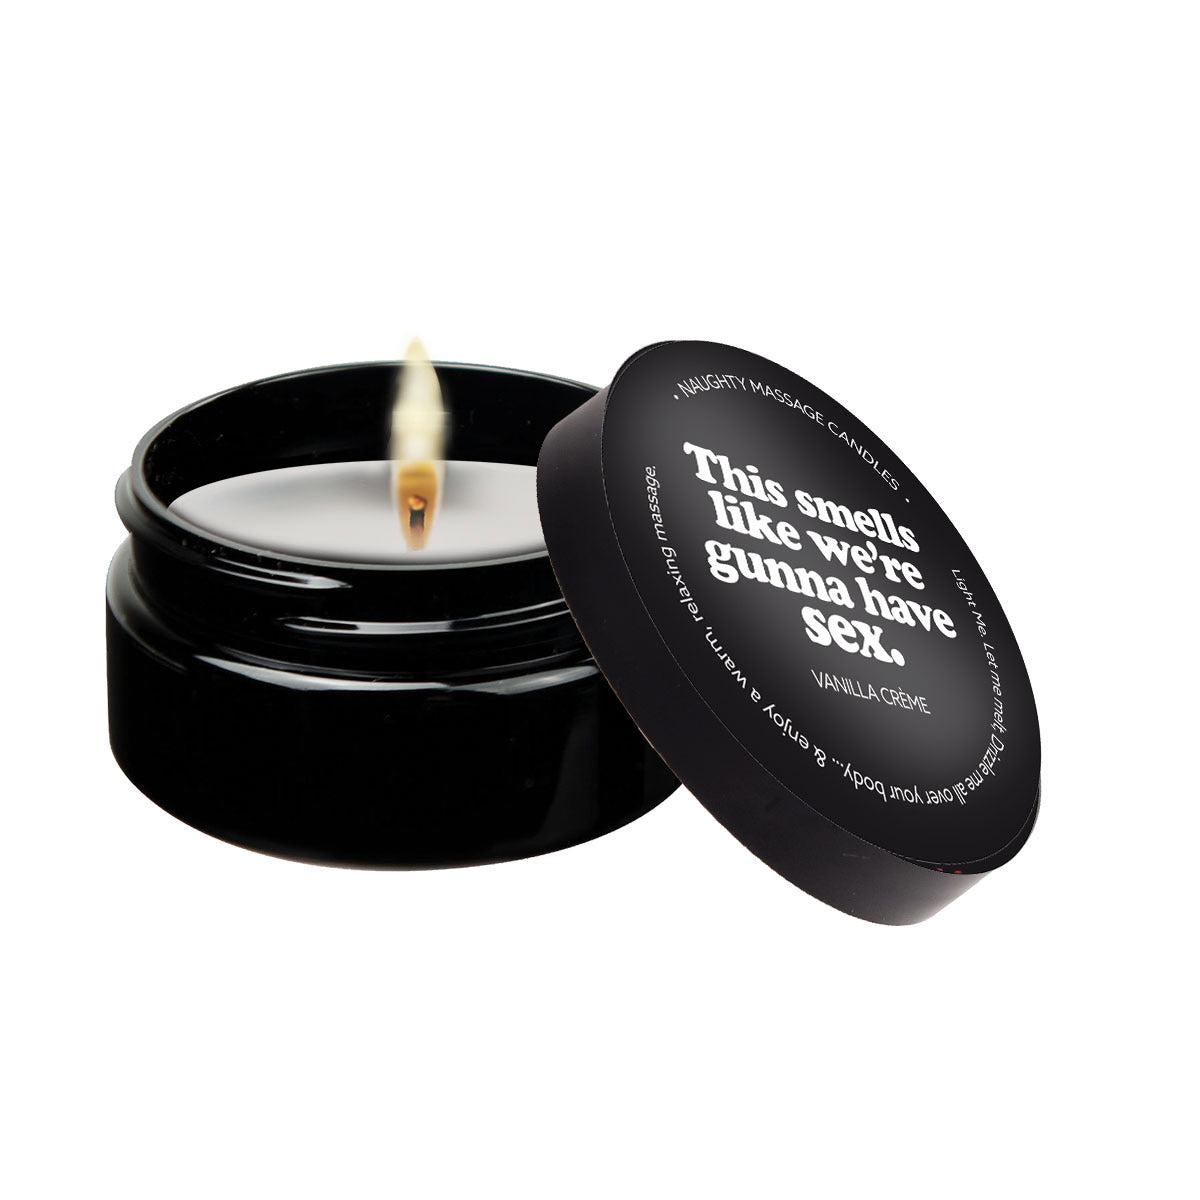 This Smells Like We're Gunna Have Sex - Massage  Candle - 2 Oz - Vanilla